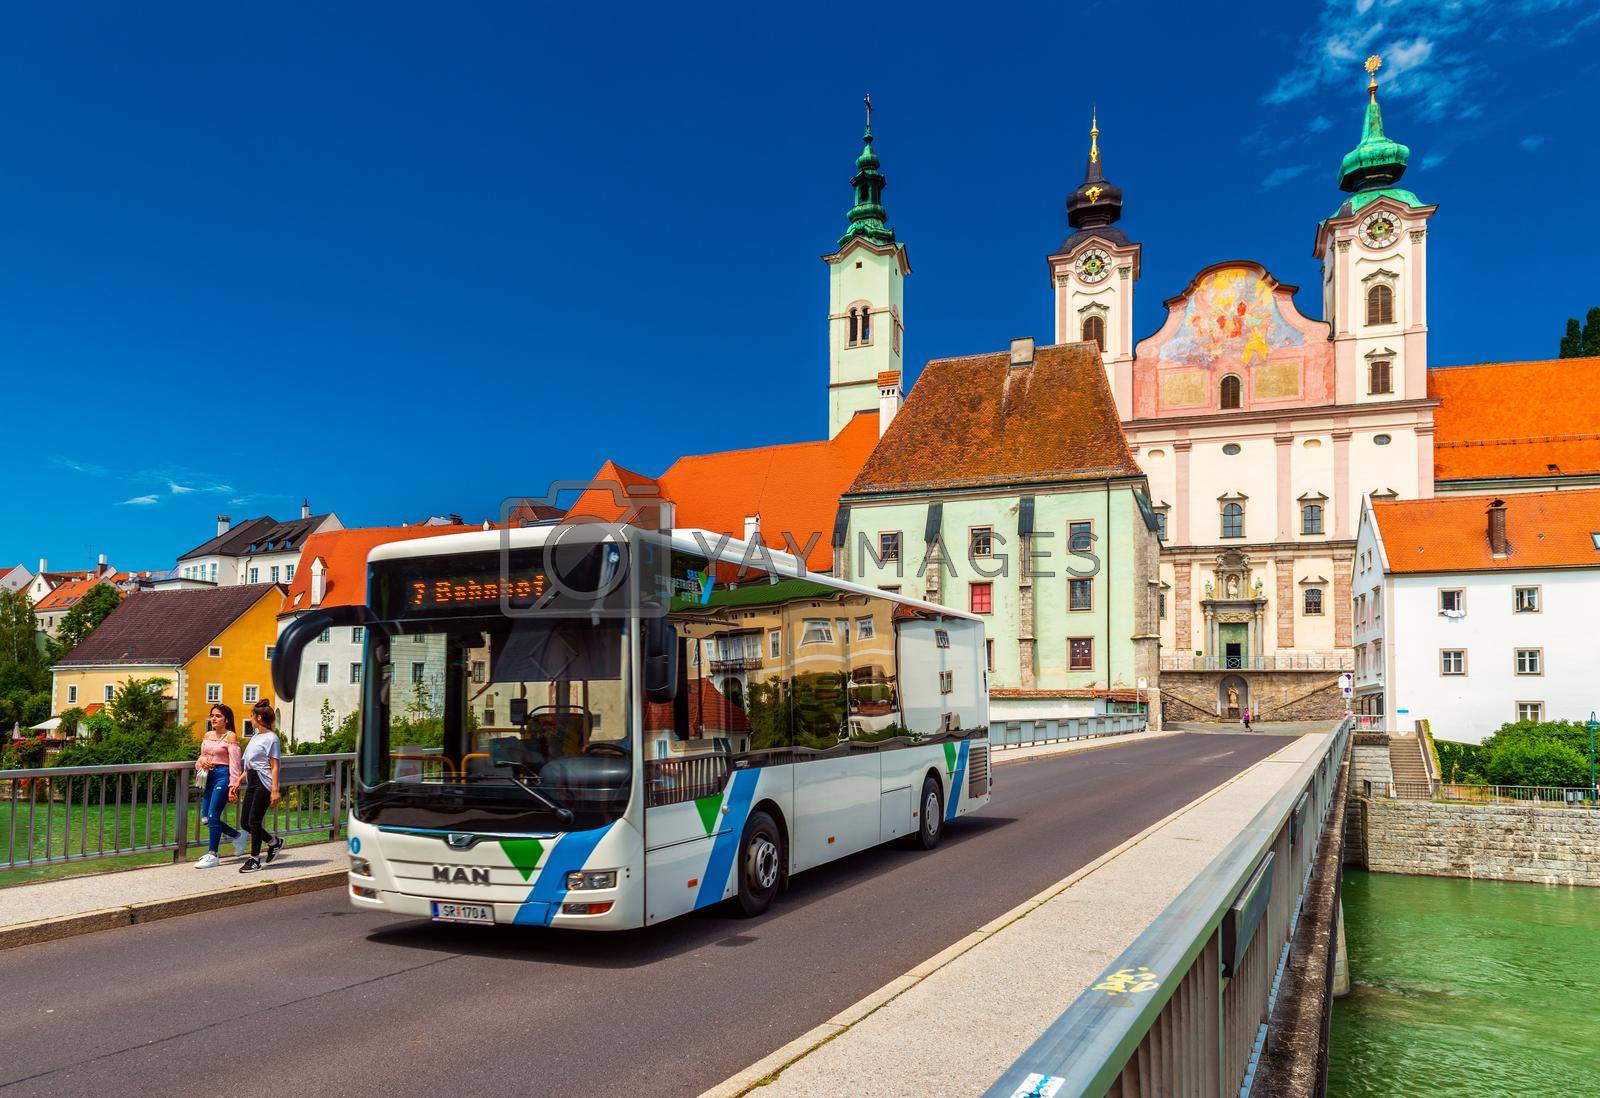 Royalty free image of Steyr - June 2020, Austria: View of the Steyr Bridge with a modern bus, walking girls, and St. Michael's Church behind by travellaggio